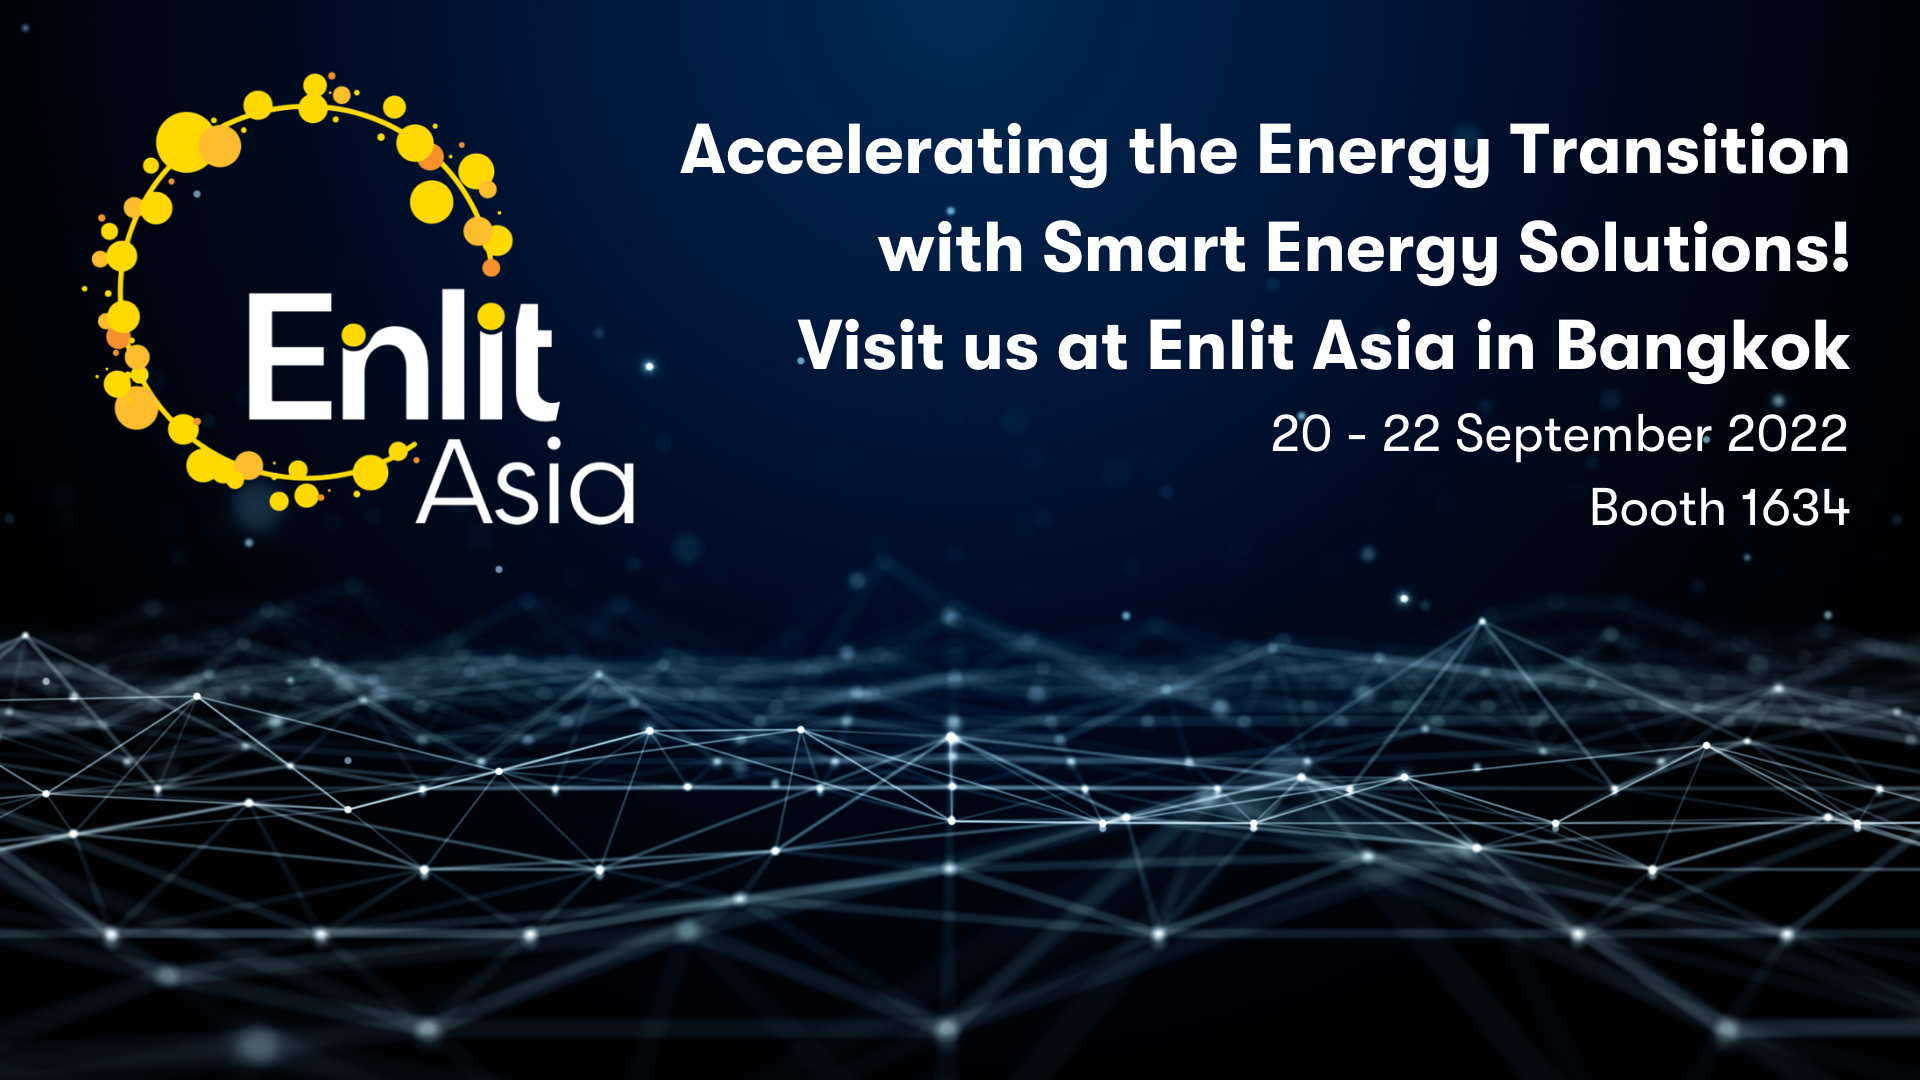 uploads/pics/https://energies.iqony.energy/uploads/pics/Accelerating_the_Energy_Transition_with_Smart_Digital_Solutions_Visit_us_at_Enlit_Asia_in_Bangkok__1__18.png